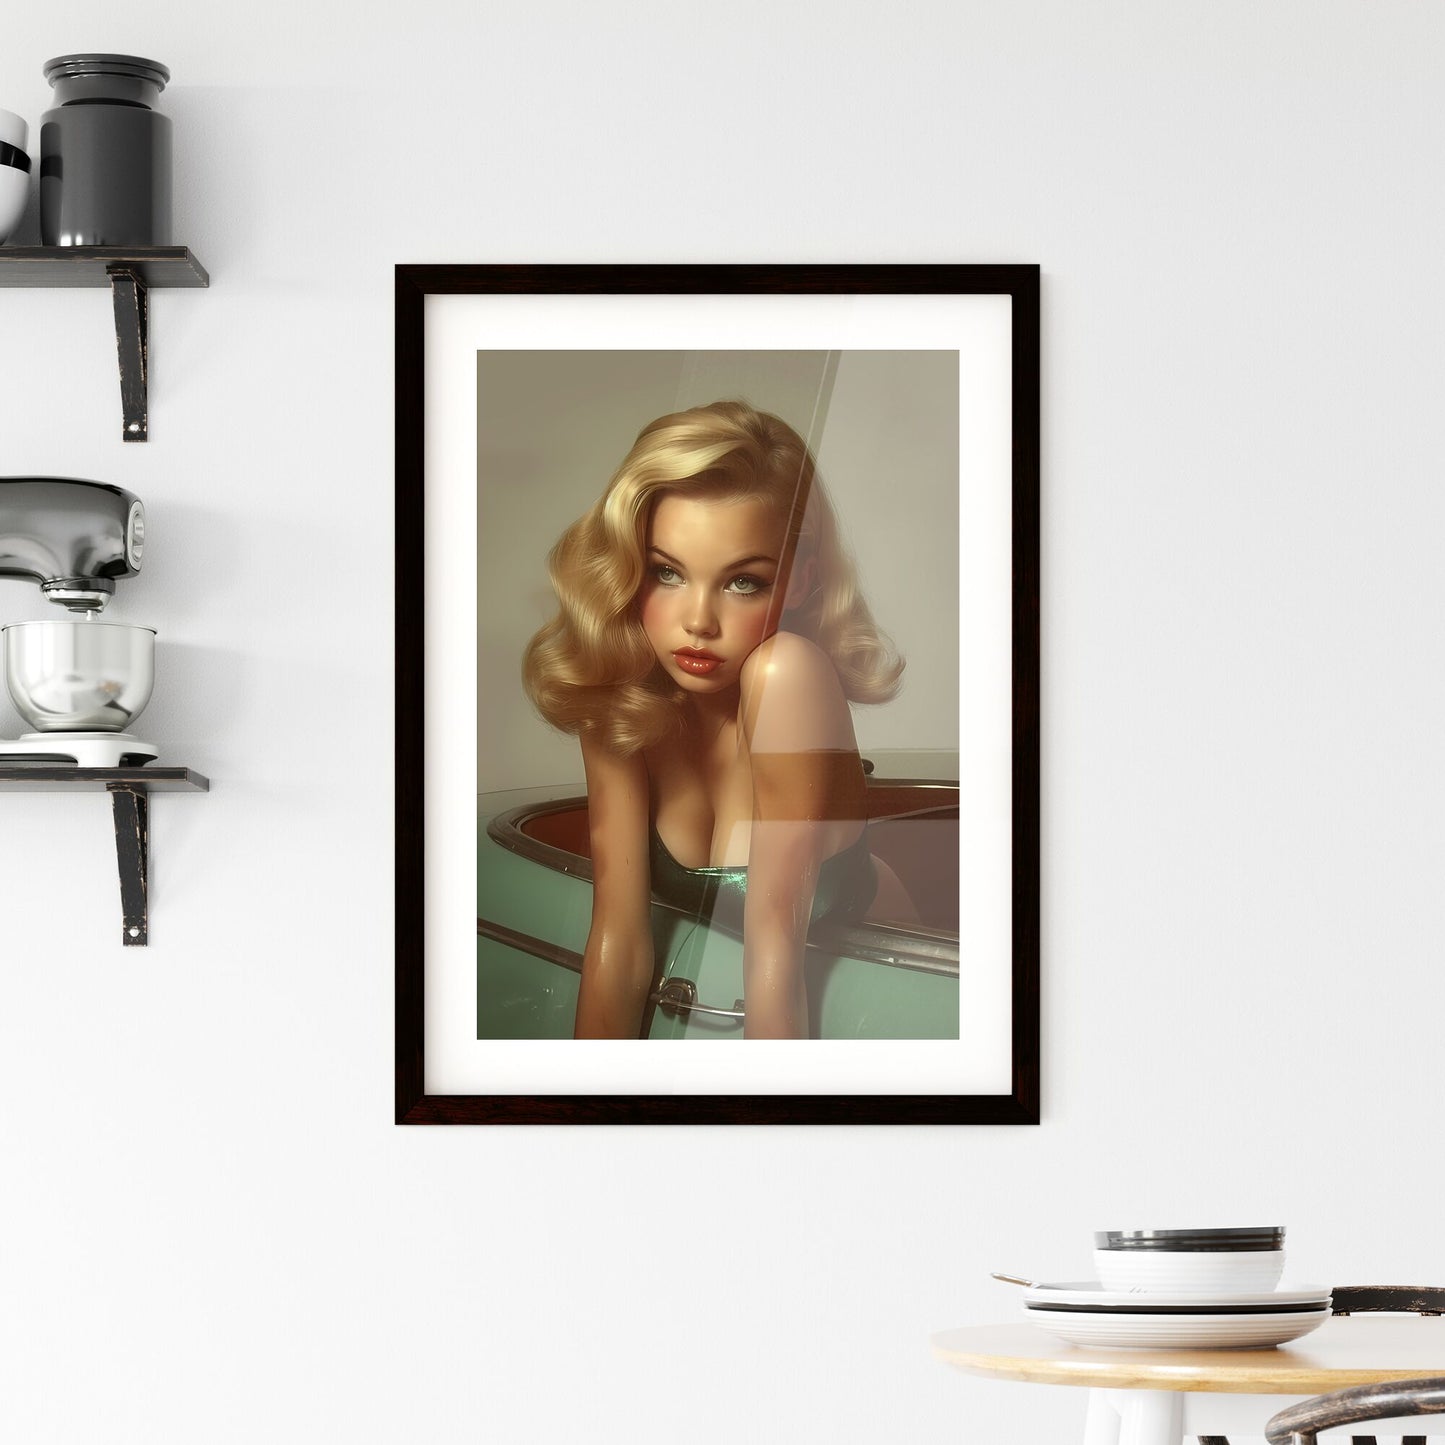 The vintage pin up girl leaning on a car - Art print of a woman leaning on a car Default Title